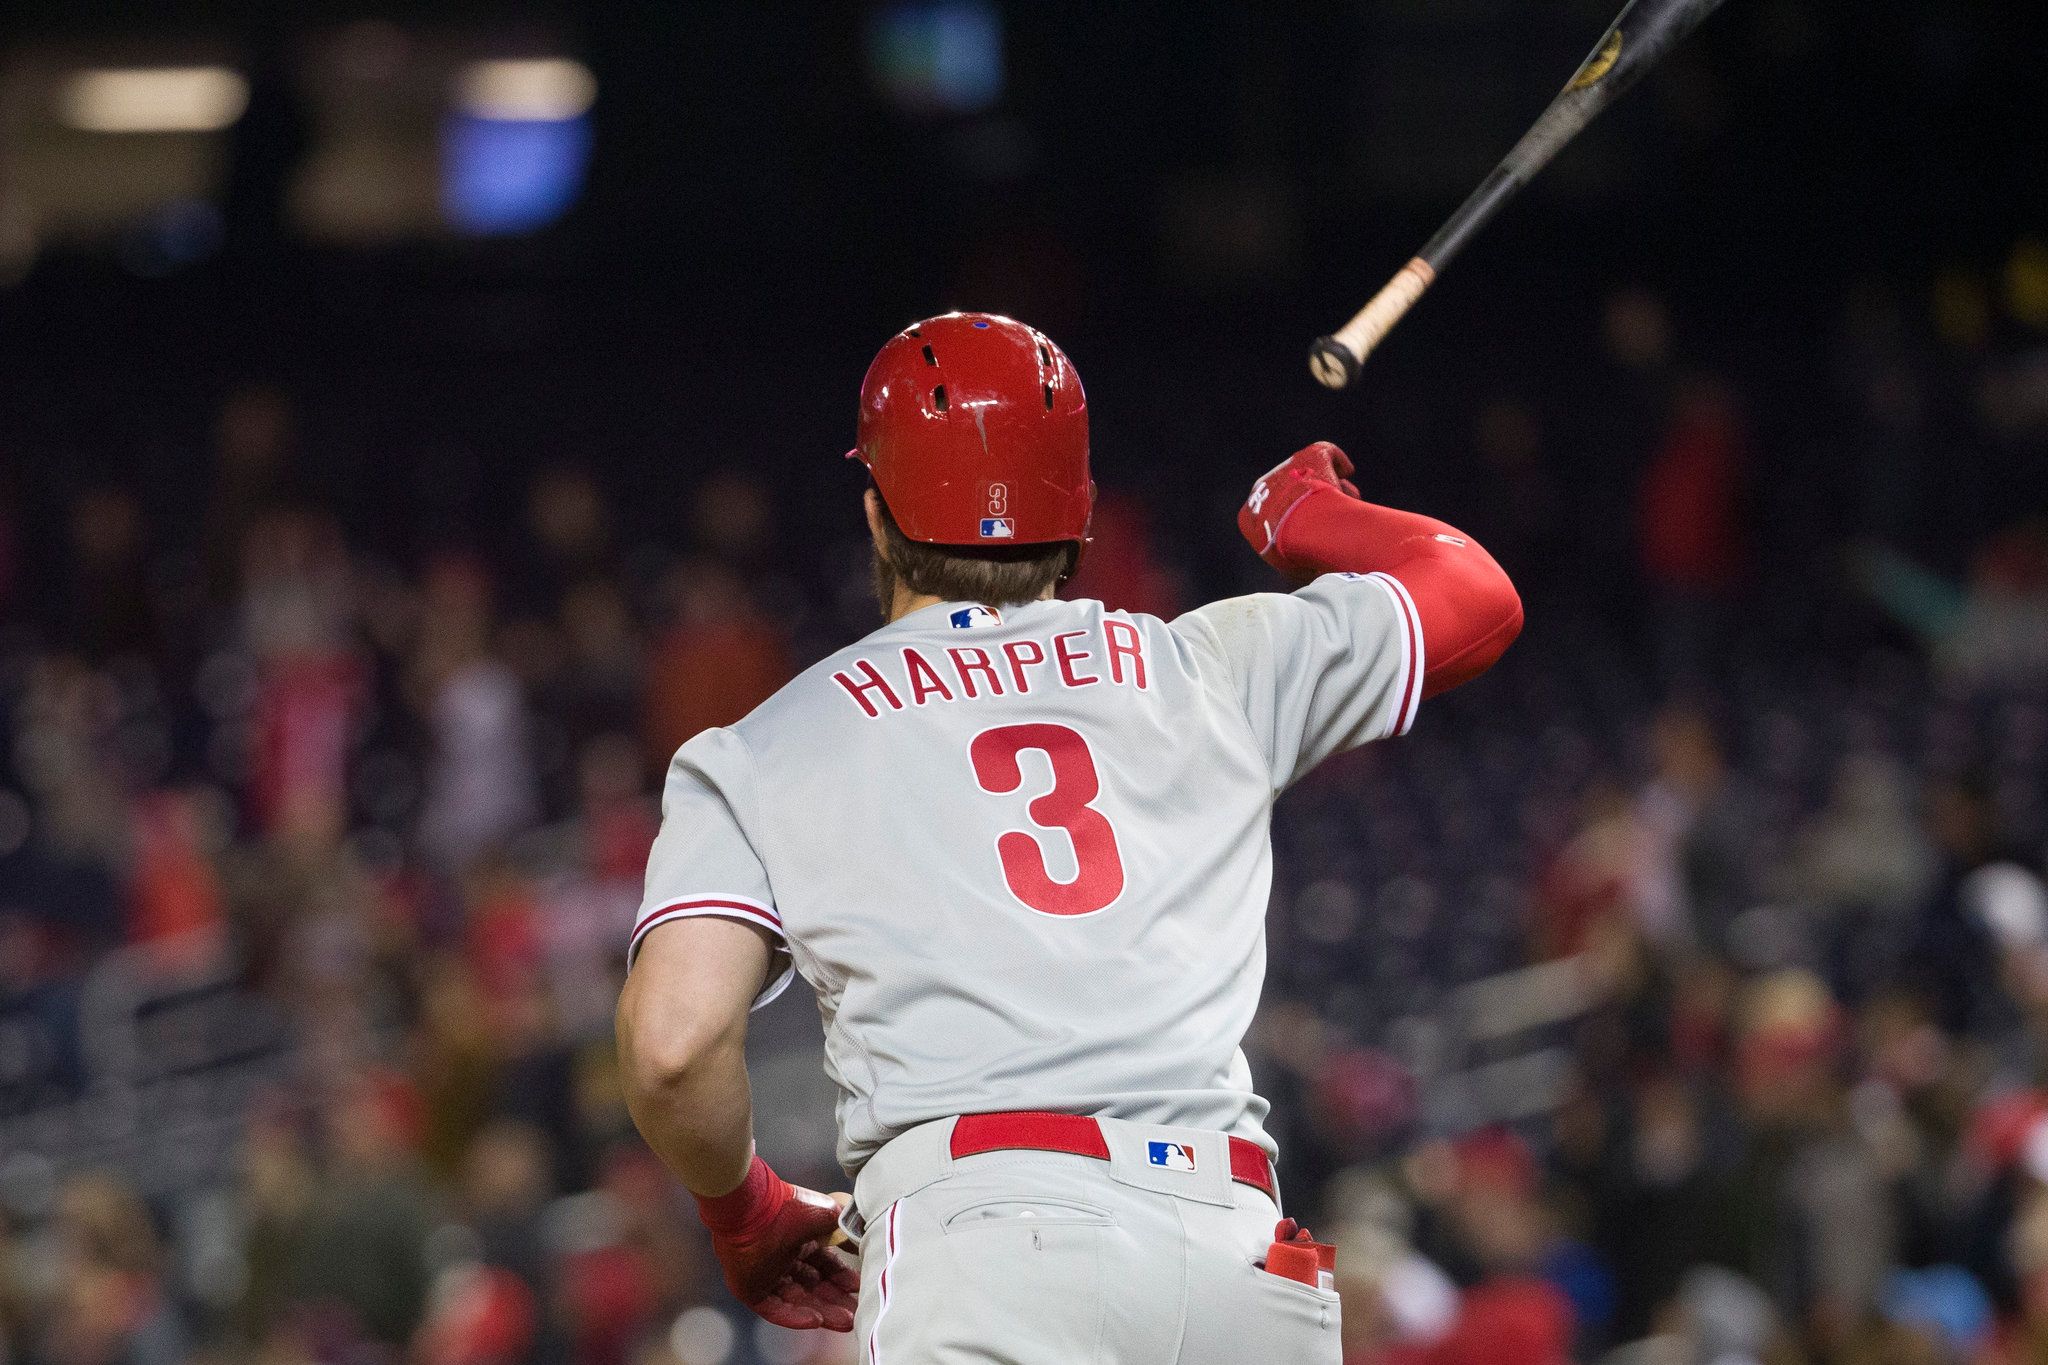 Bryce Harper With the Epic Bat Flip (and, Oh Yeah, a Homer)